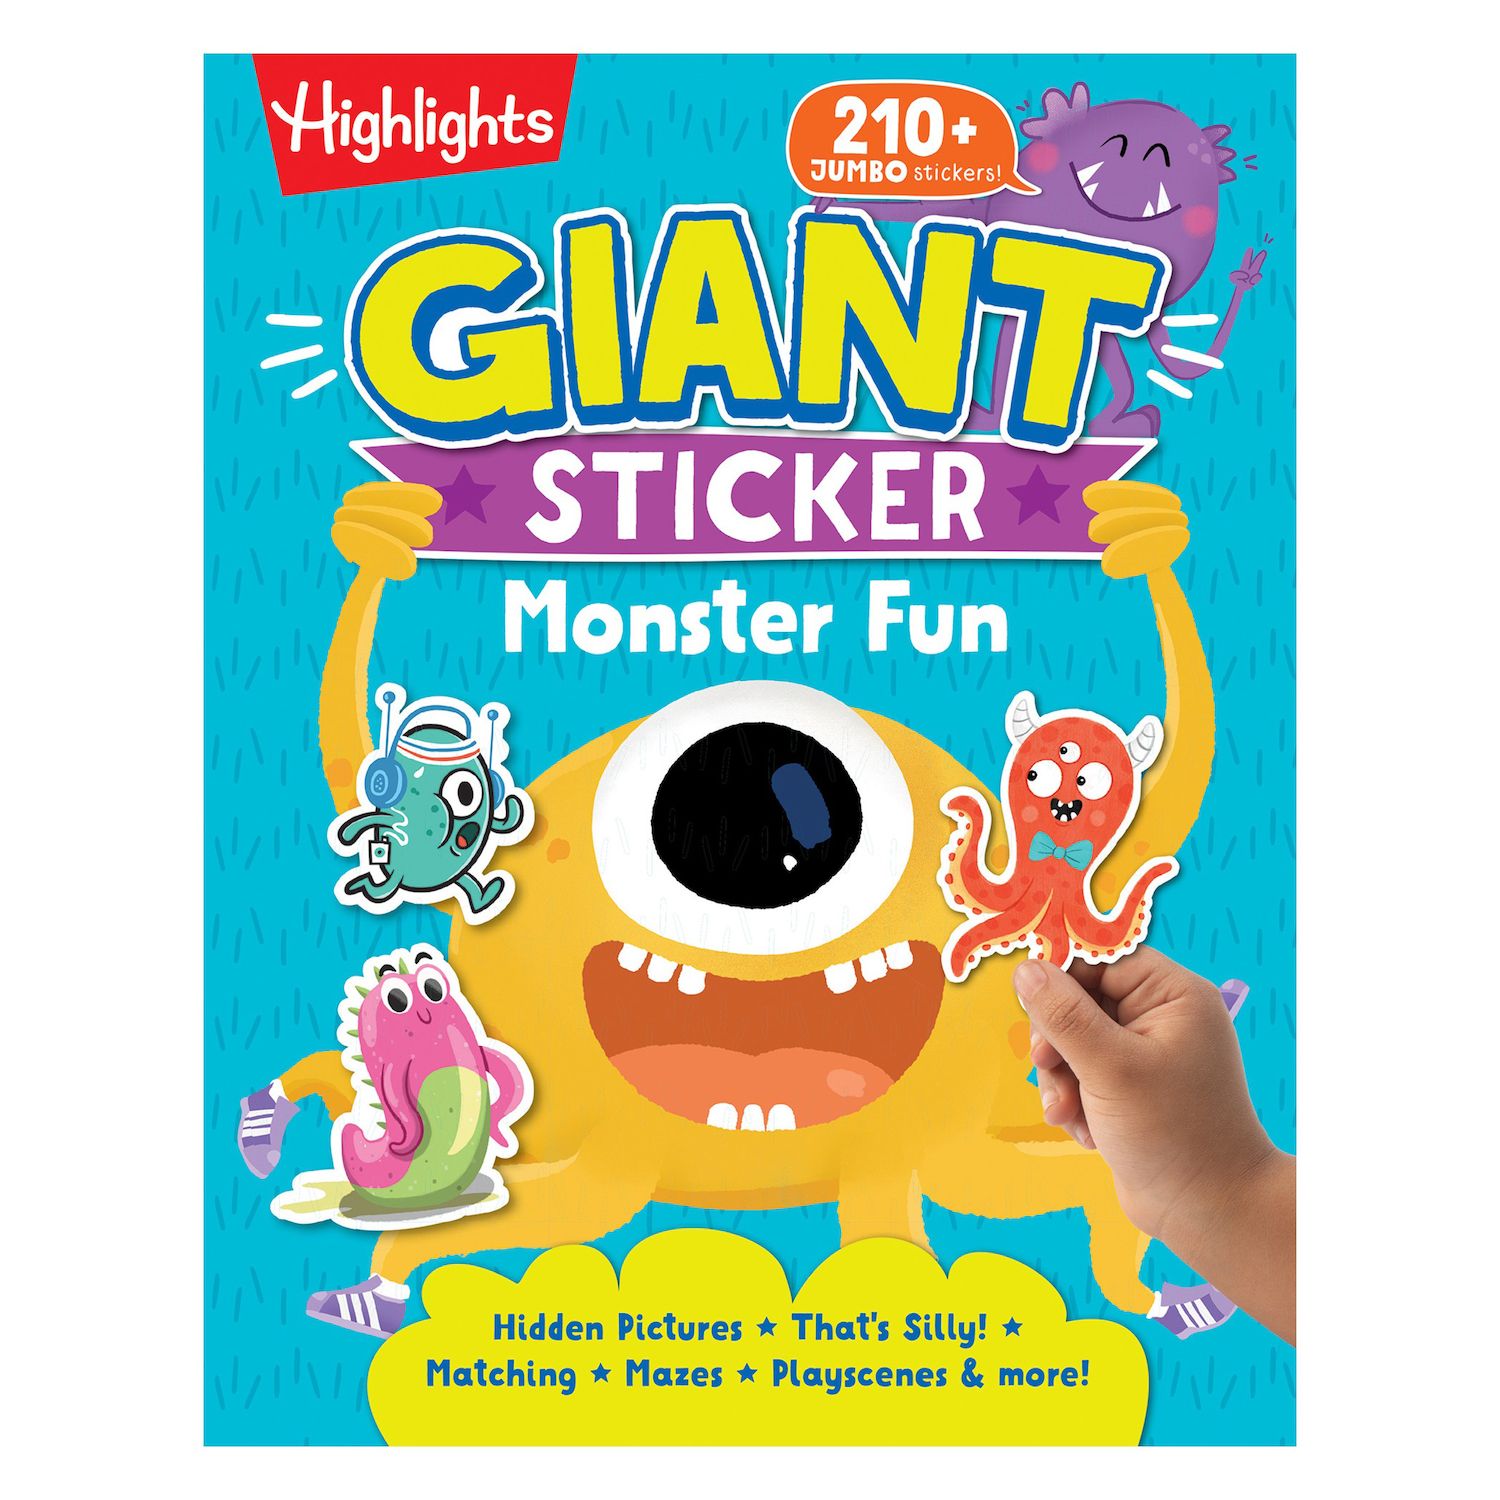 Big Dot of Happiness Gear Up Robots - Birthday Party Favor Kids Stickers -  16 Sheets - 256 Stickers